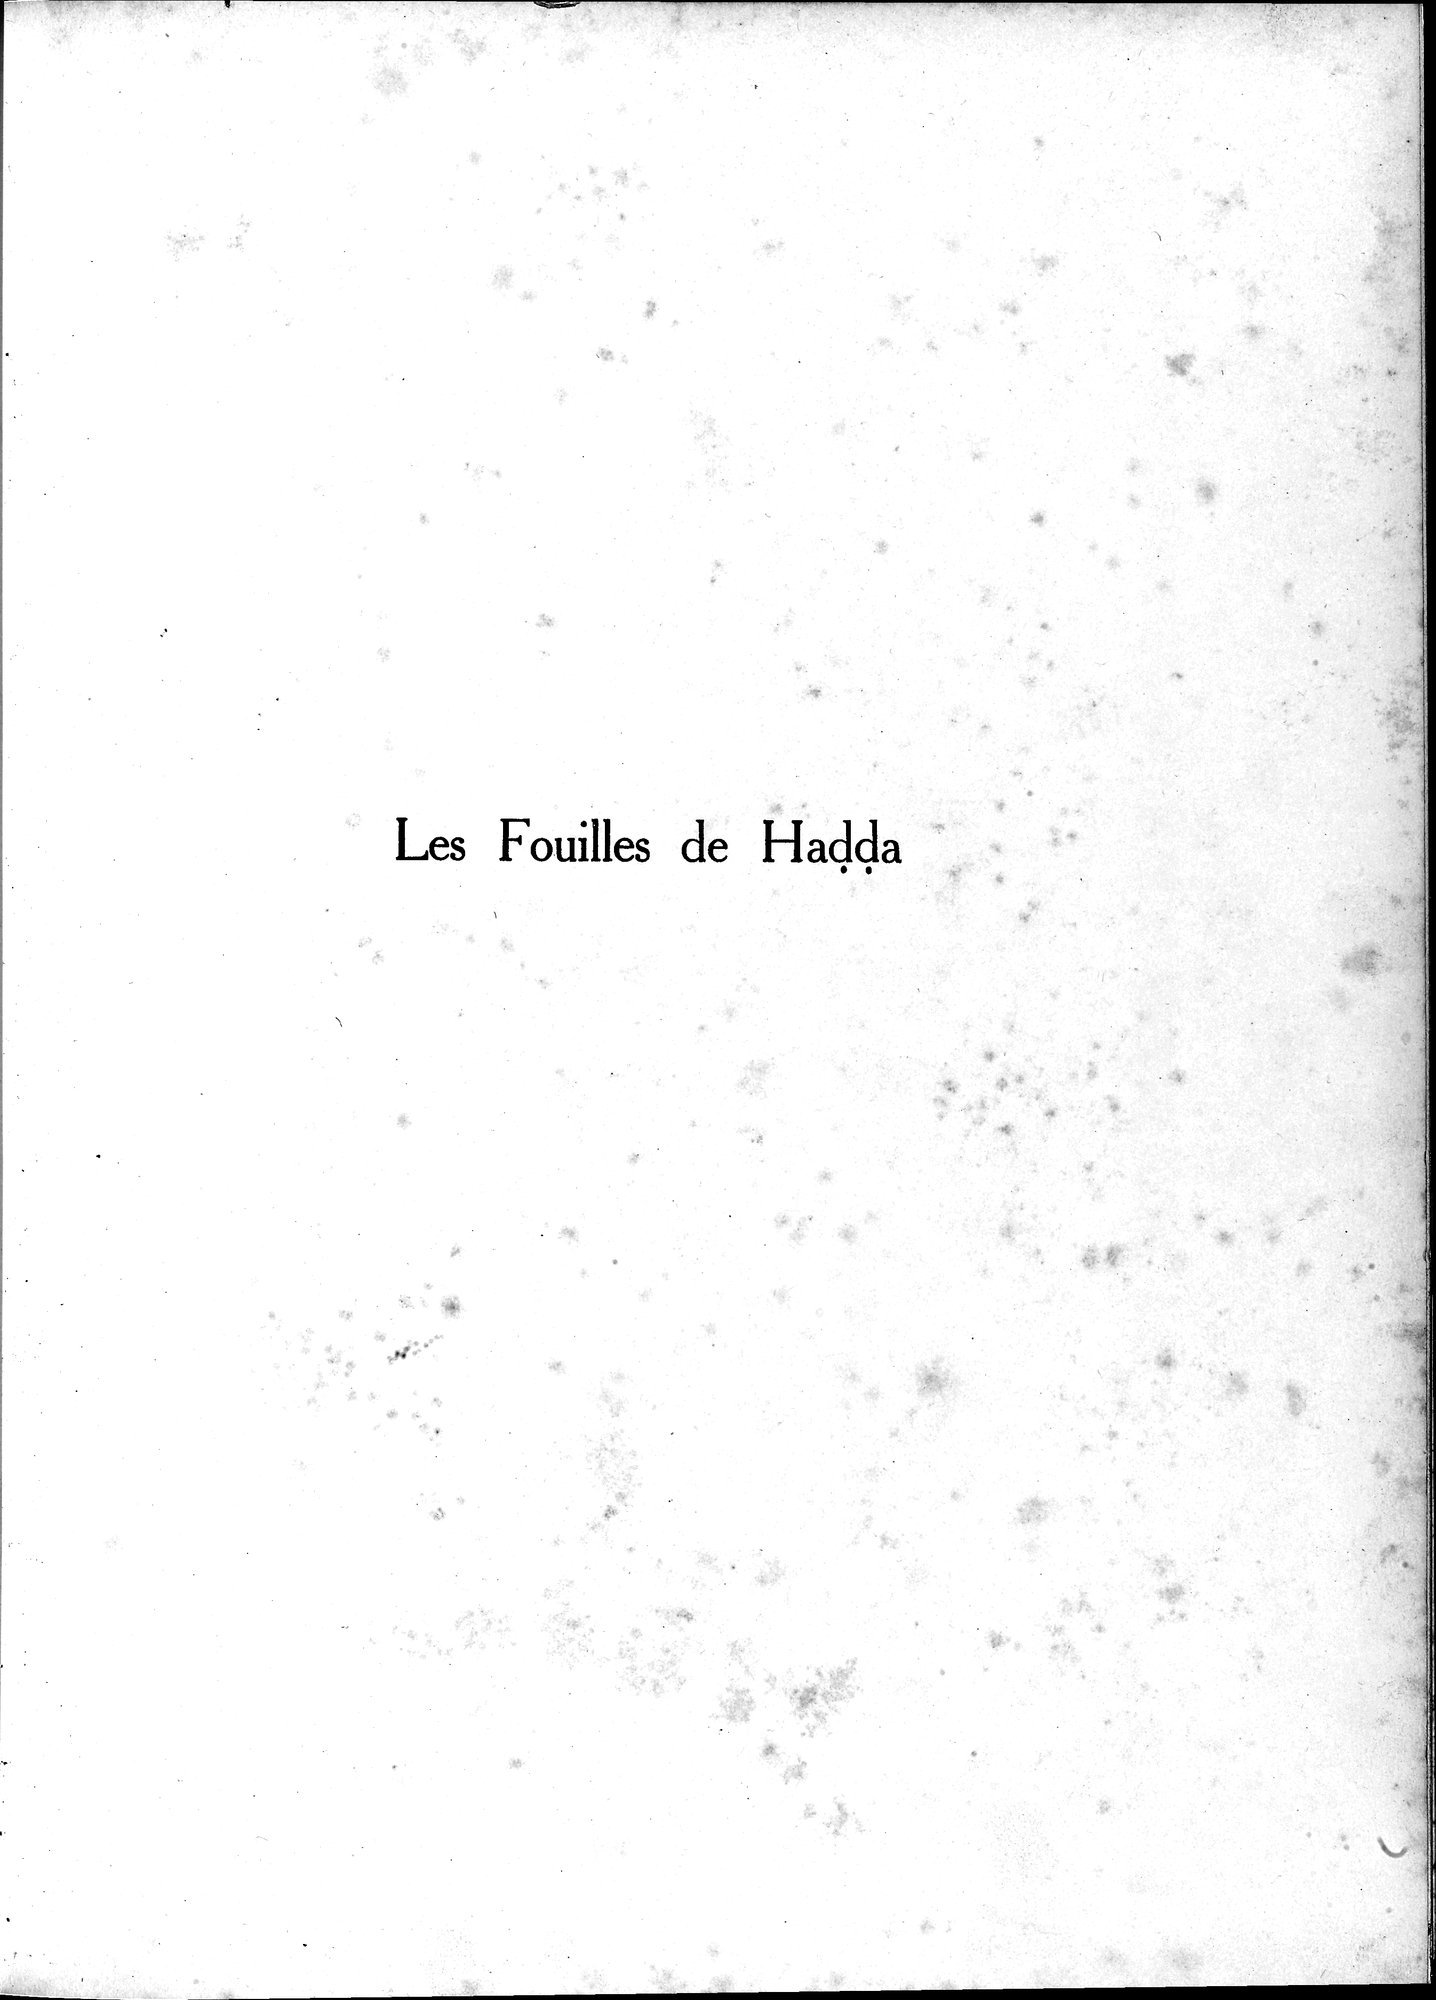 Les Fouilles de Haḍḍa III : vol.3 / Page 9 (Grayscale High Resolution Image)